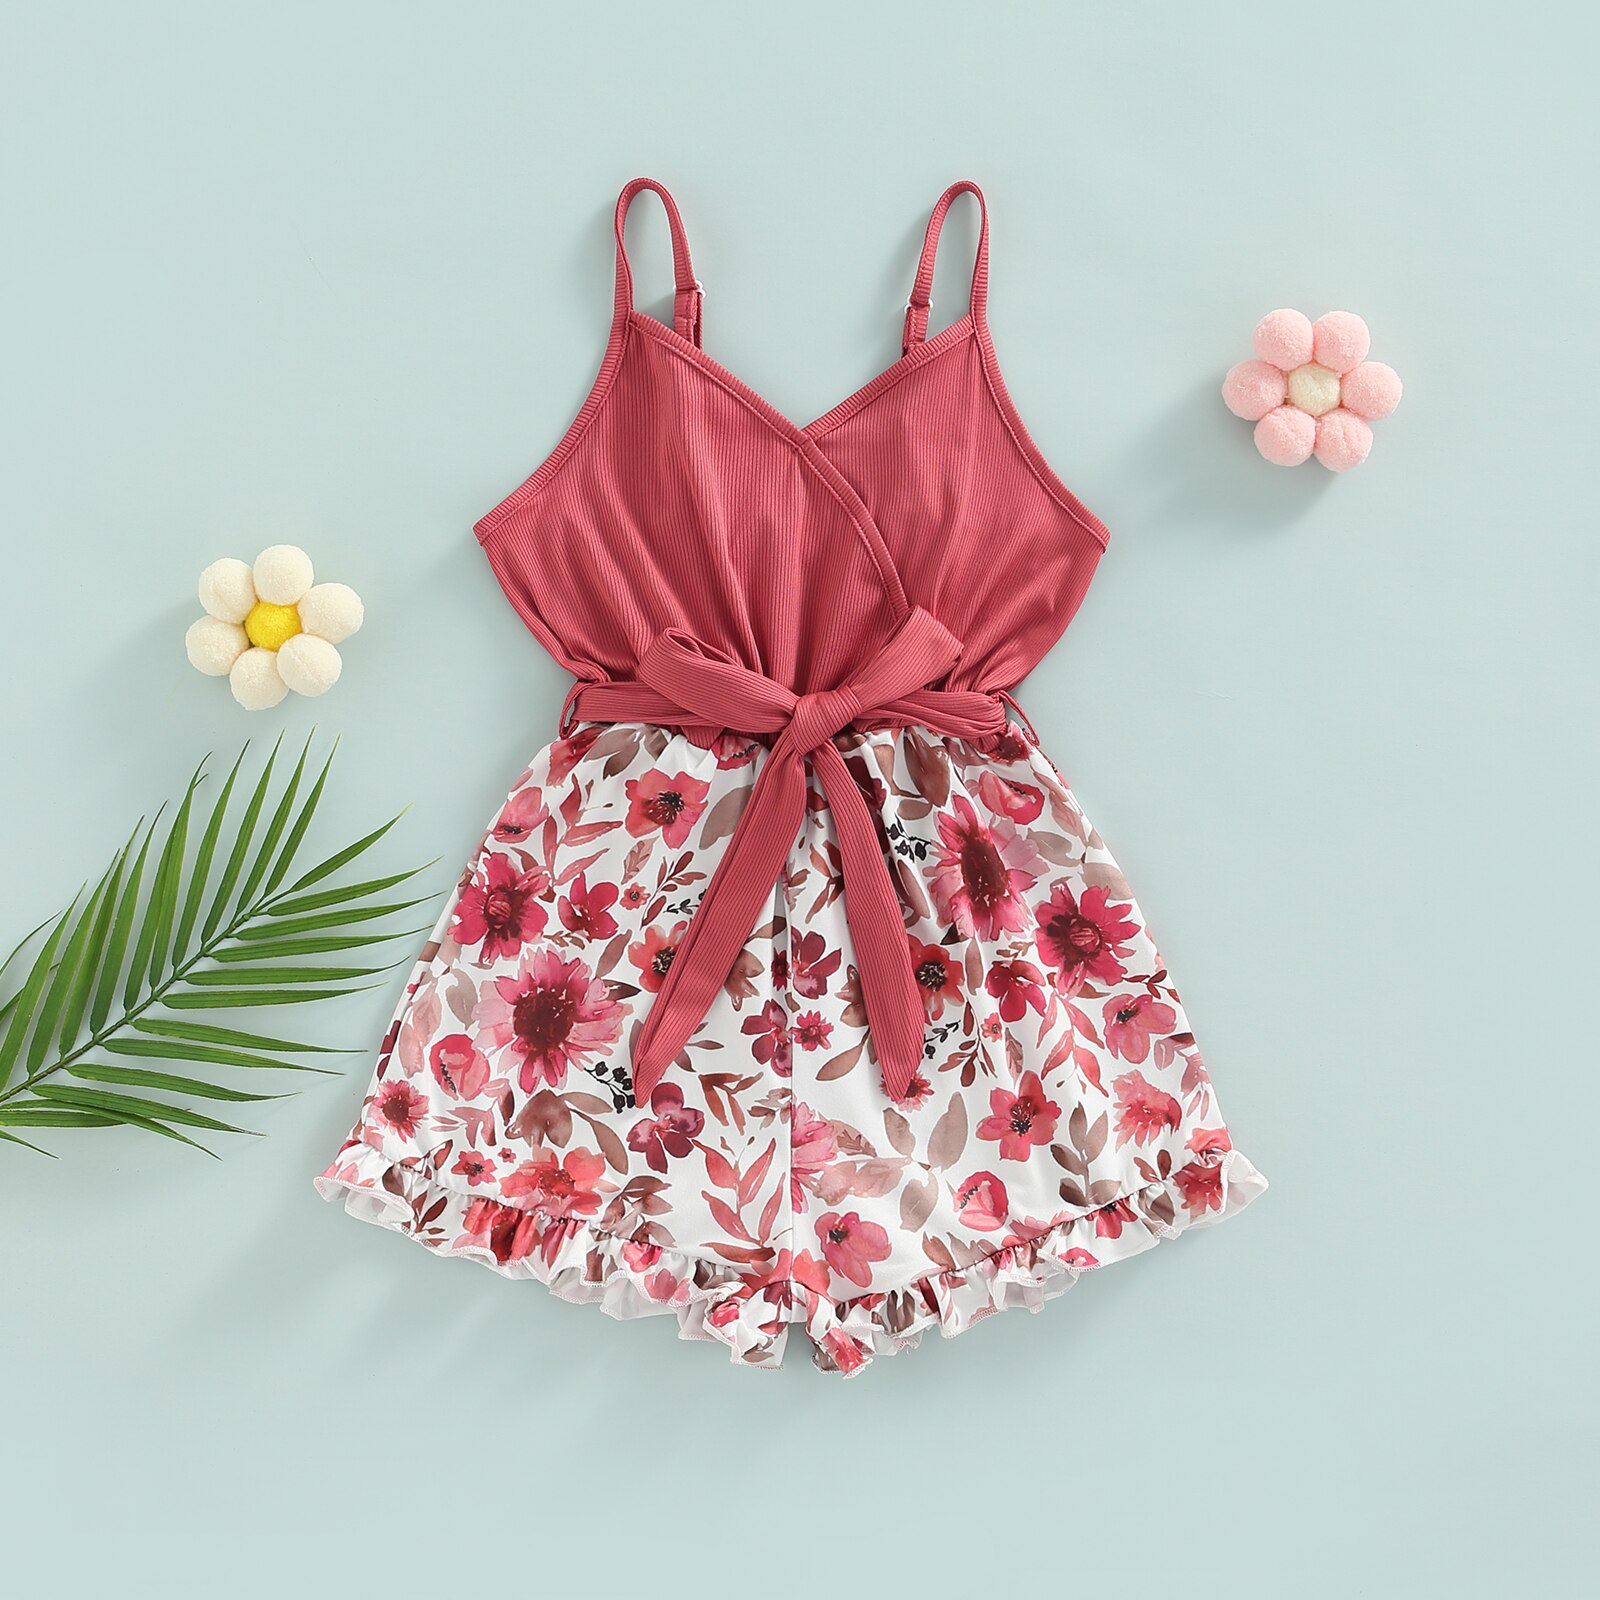 Kid-Baby-Girls-Summer-Short-Romper-Floral-Print-Sleeveless-Ruffled-Wide-Leg-Jumpsuit-Clothes-with-Belt-5